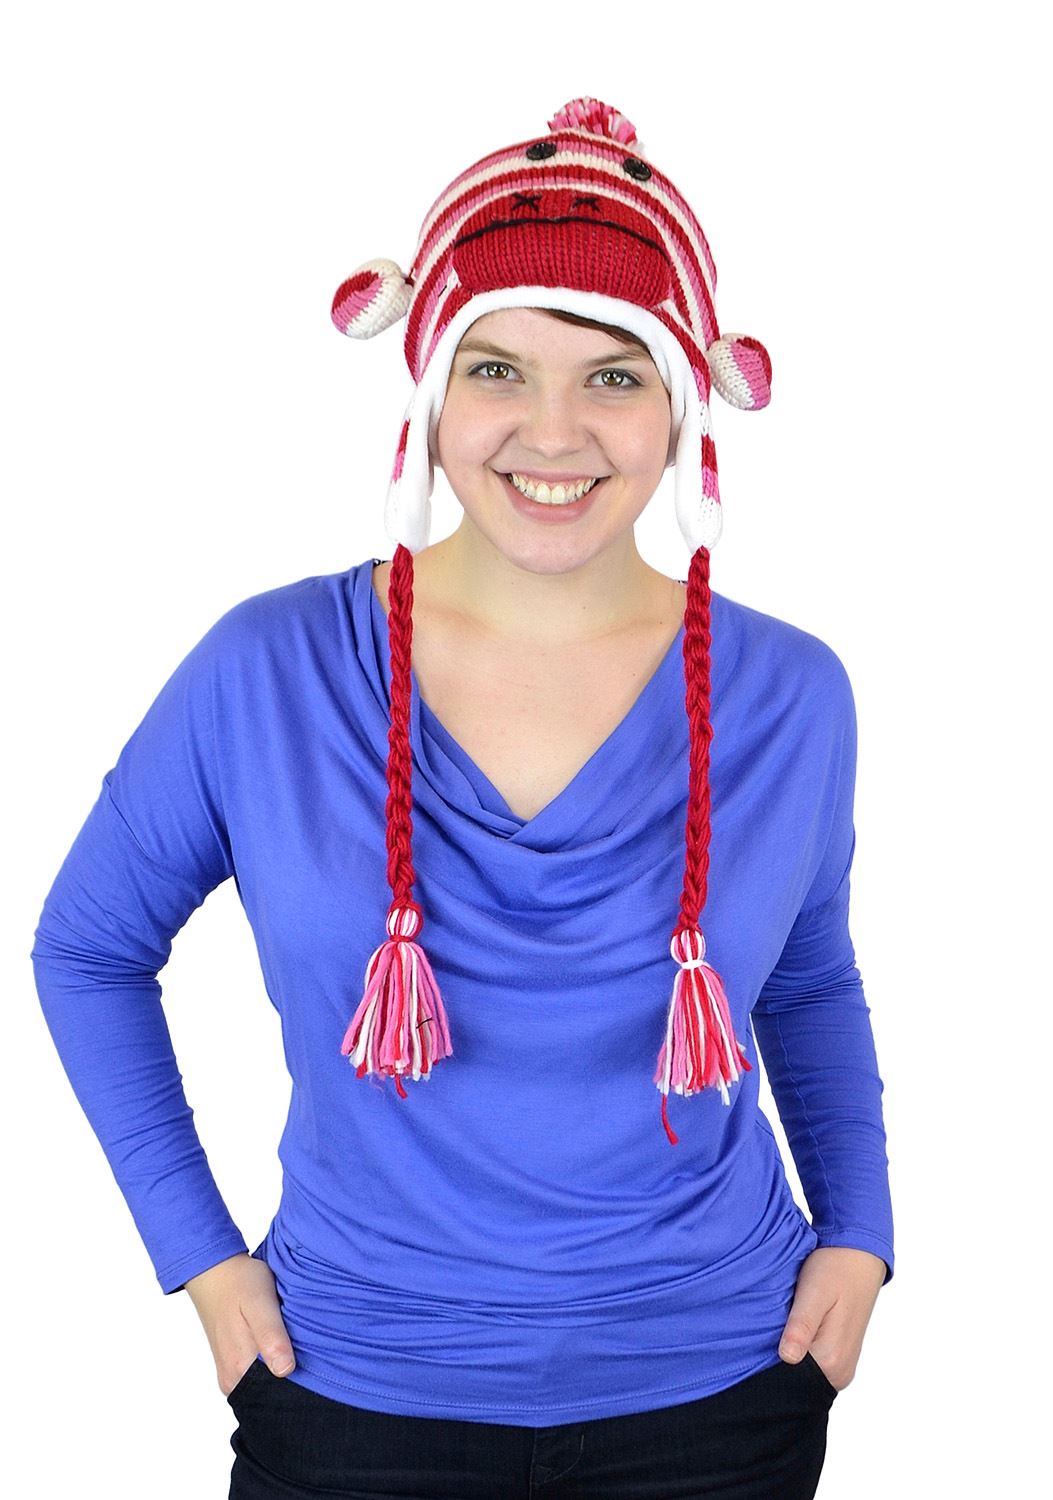 Belle Donne - Unisex Winter Monkey Animal Hats with Pom Pom - Red